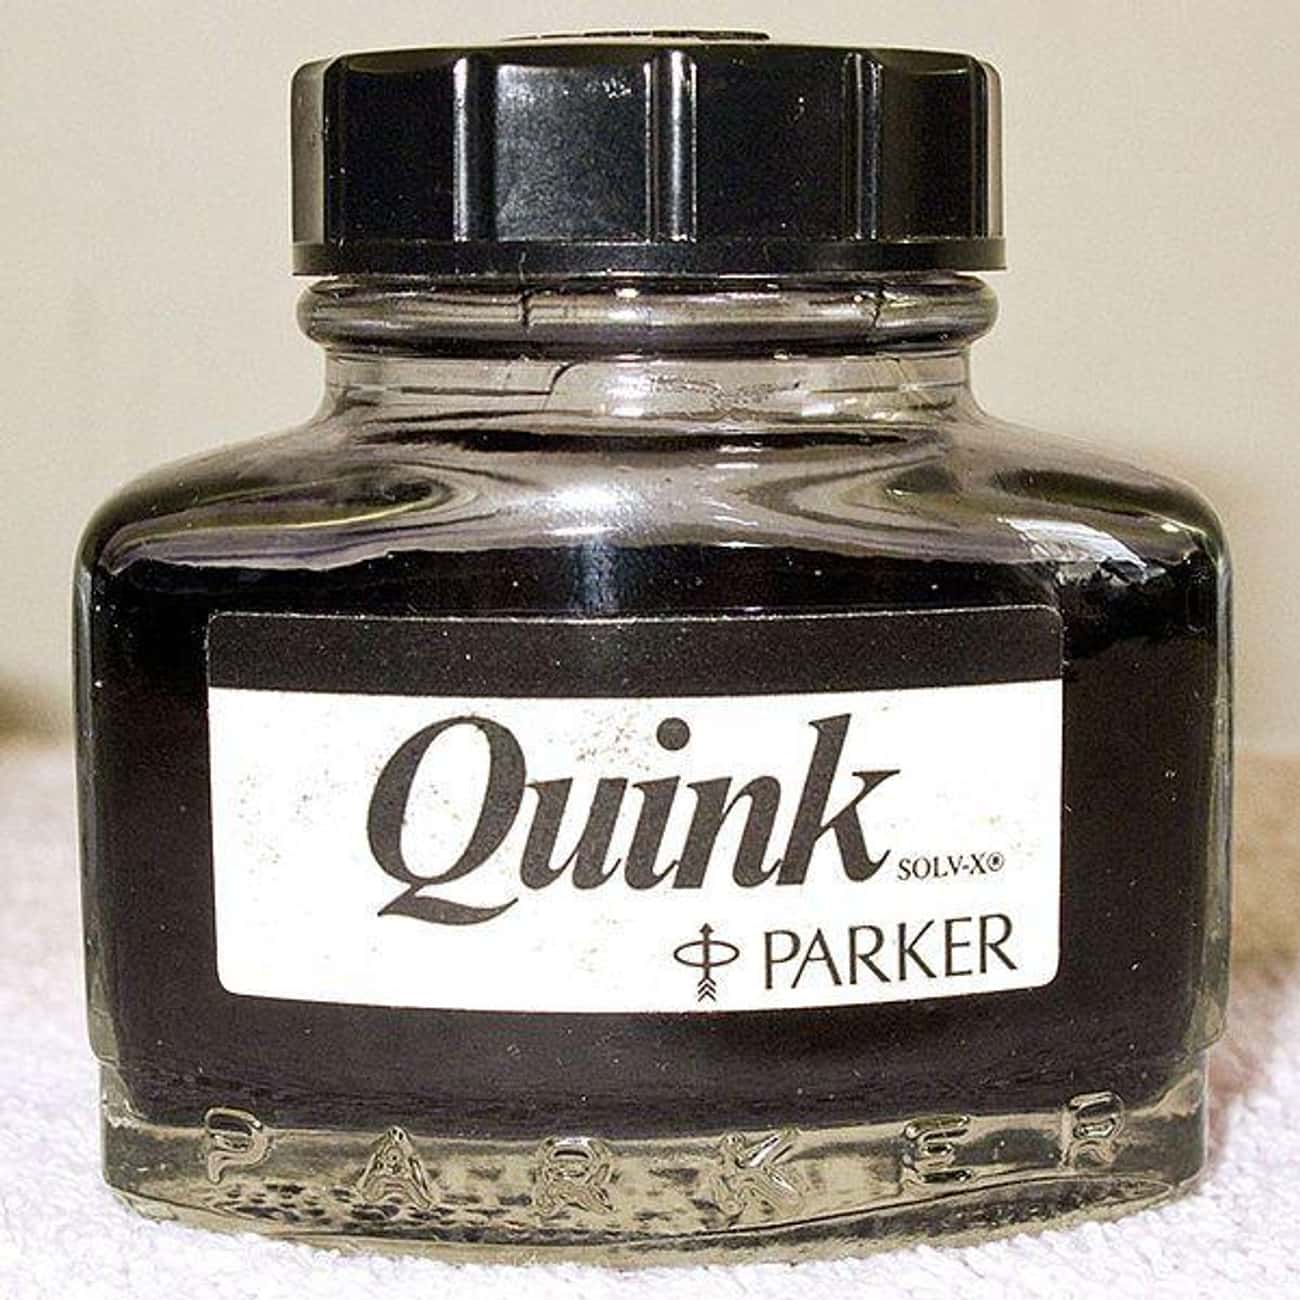 When Parker Pens Accidentally Told People Its Ink Was Birth Control